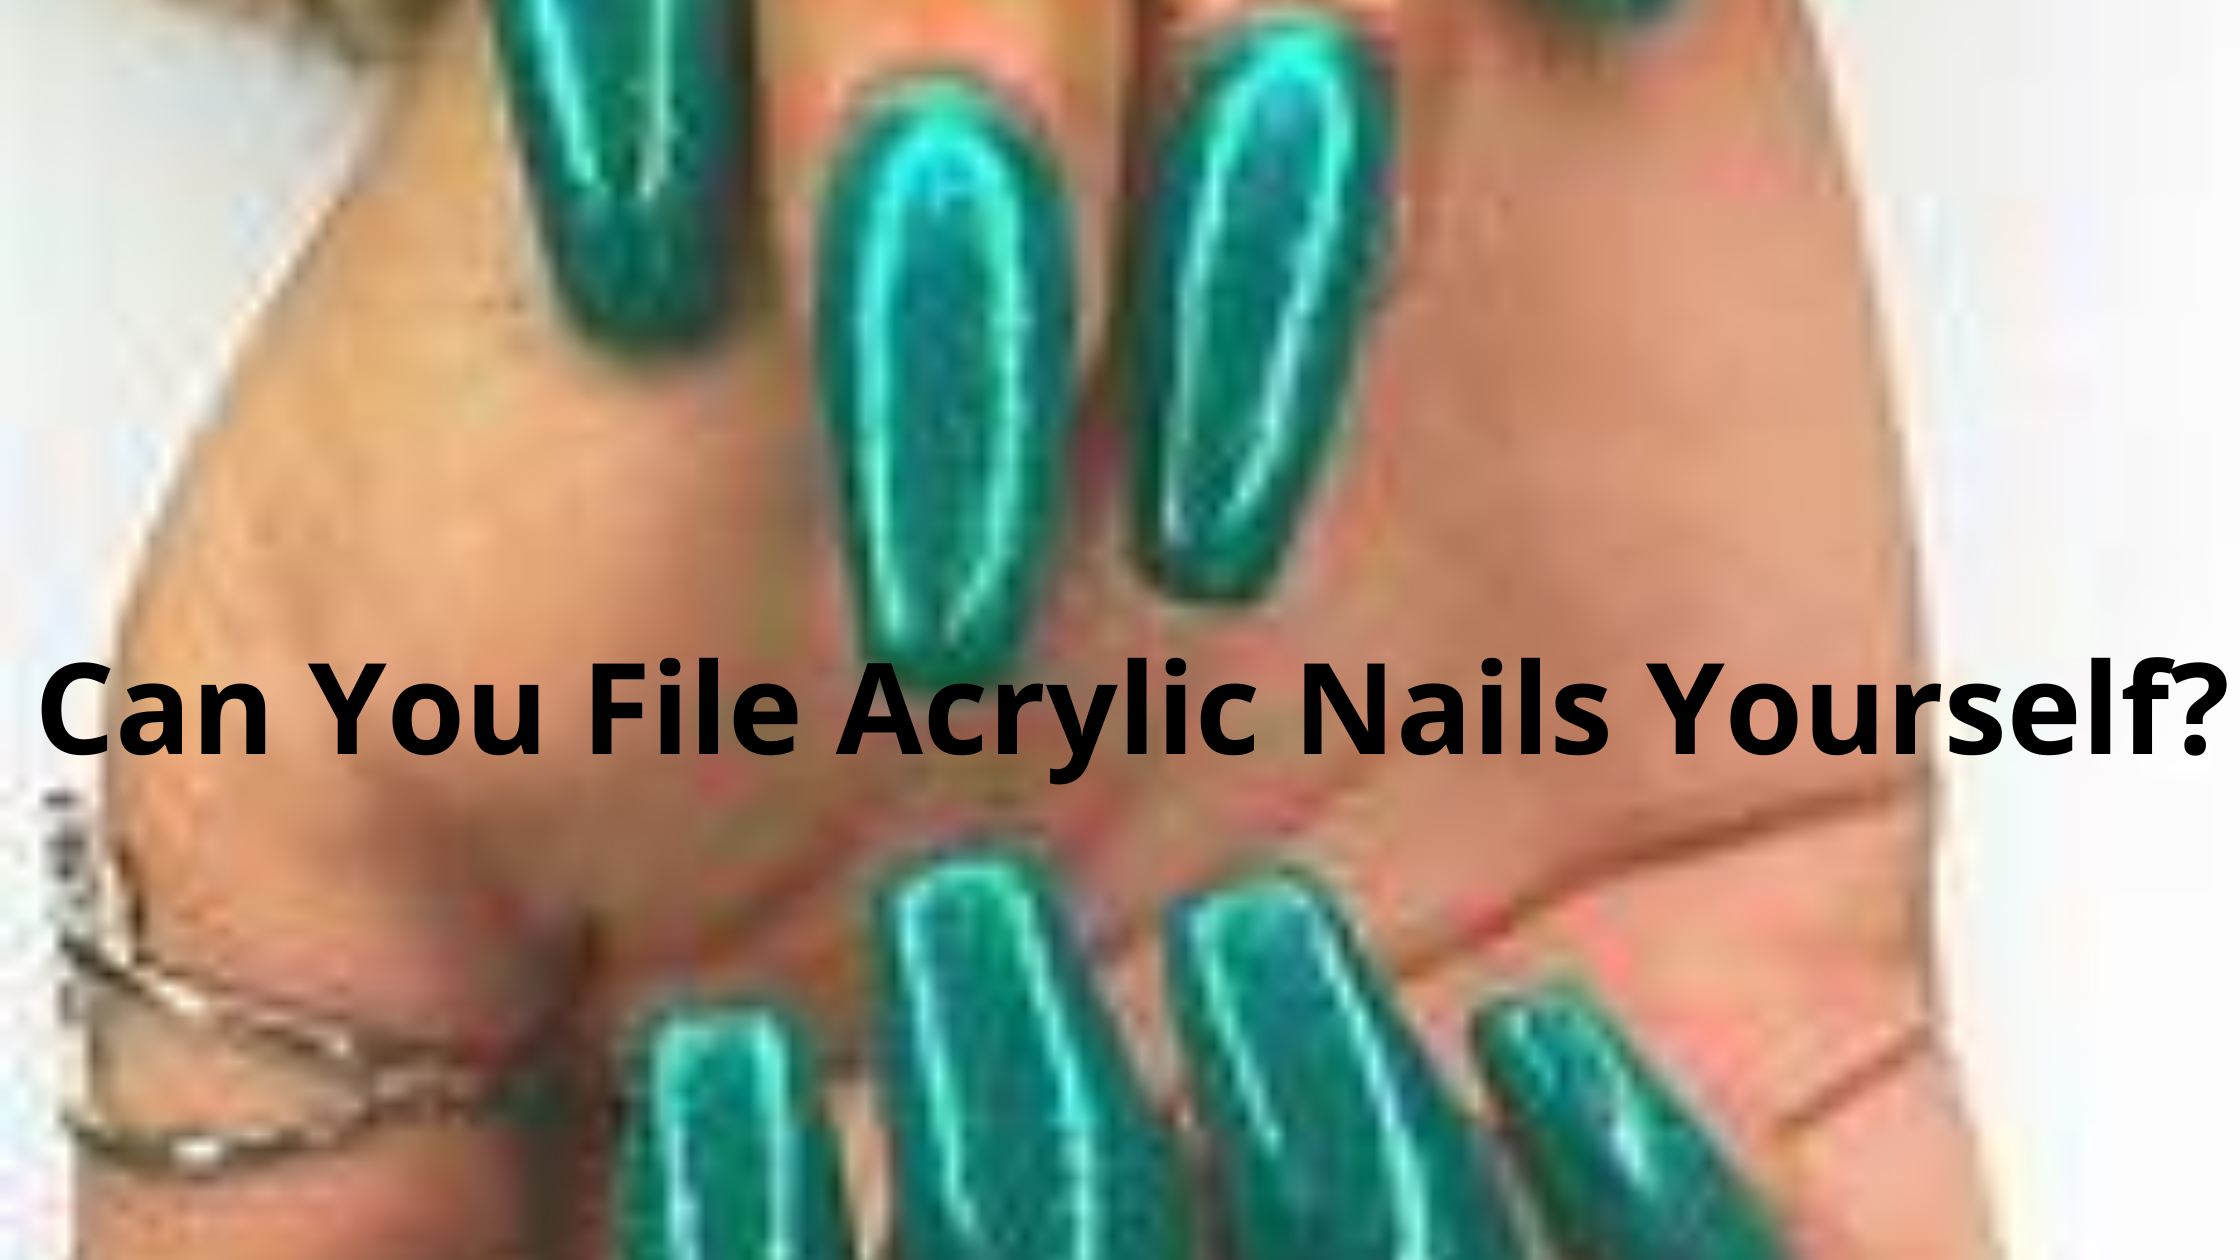 Can You File Acrylic Nails Yourself?